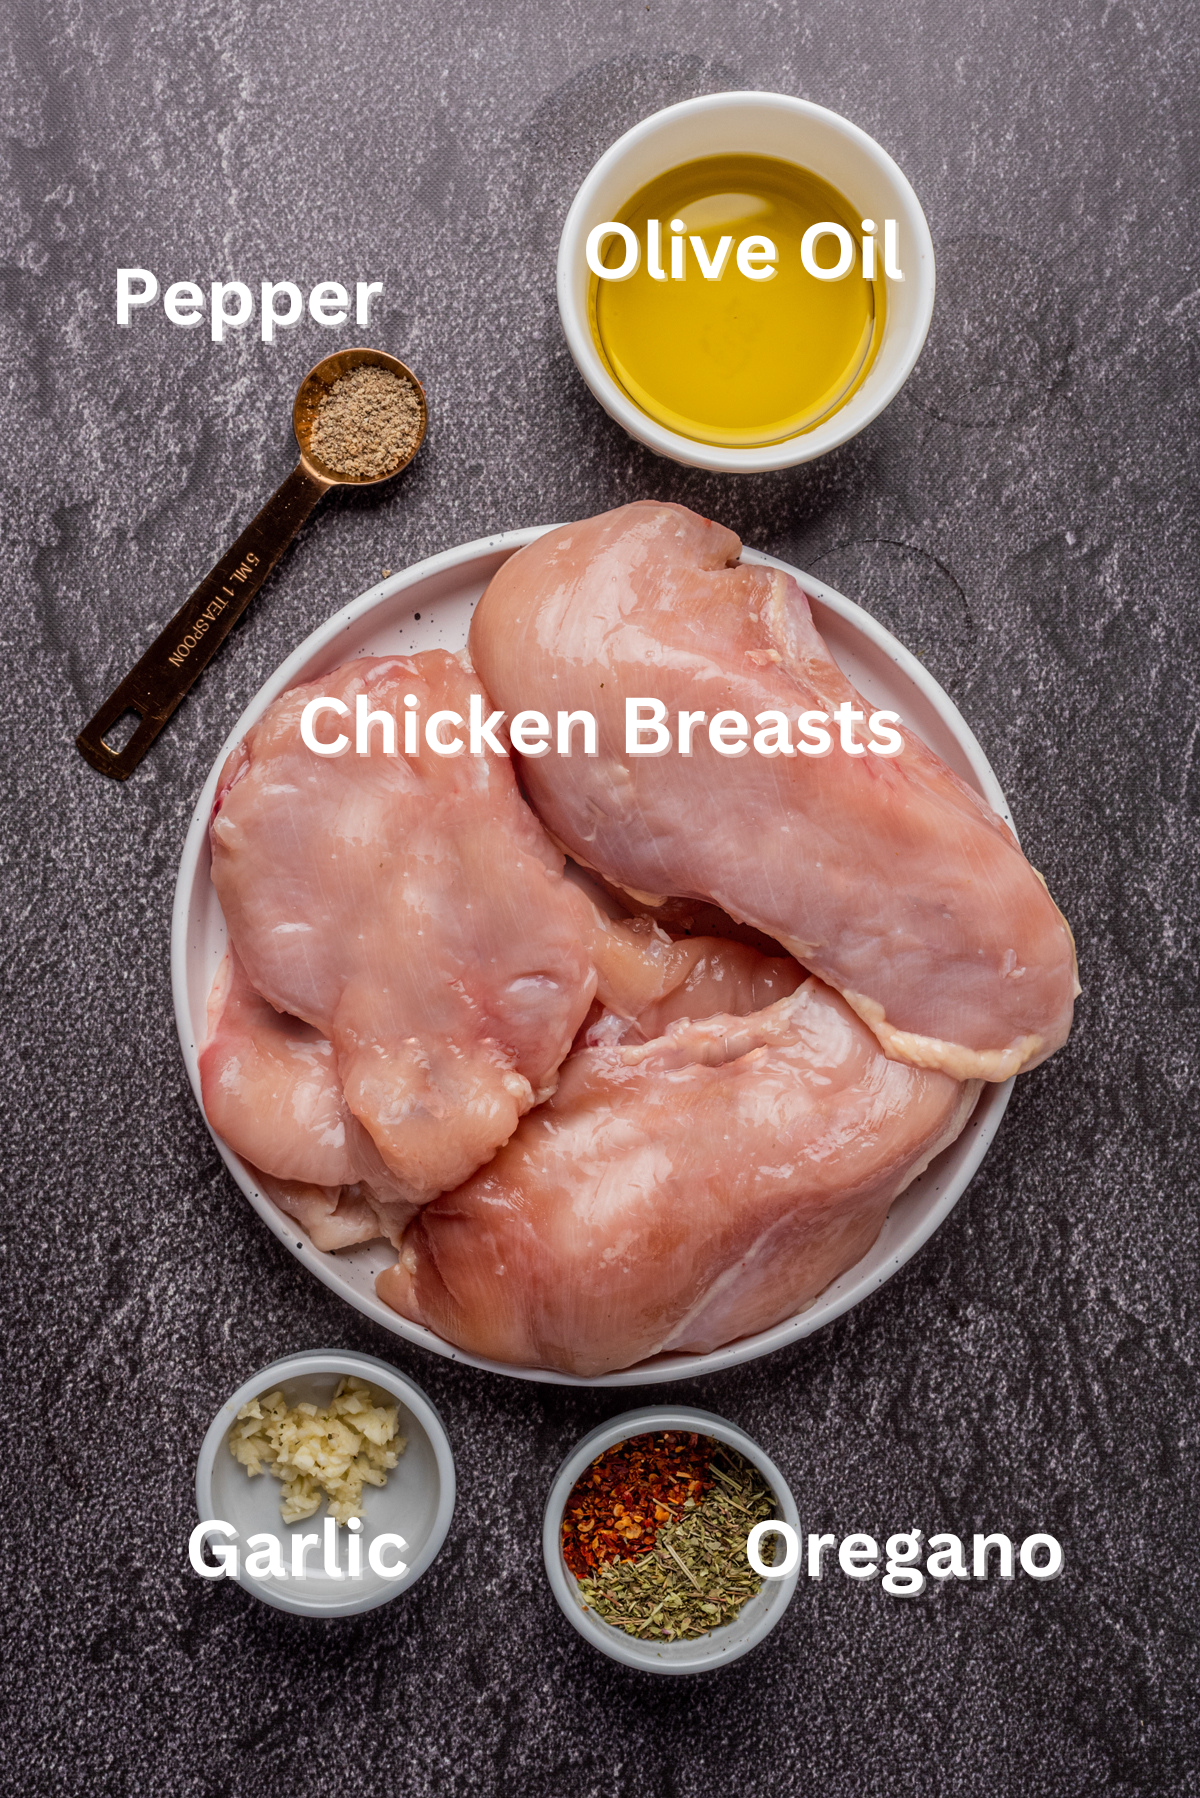 3 raw chicken breasts on a plate in the middle with the marinade ingredients of pepper on a wood spoon top left, top right in a small white bowl olive oil, bottom right in a small bowl chili flakes and oregano.